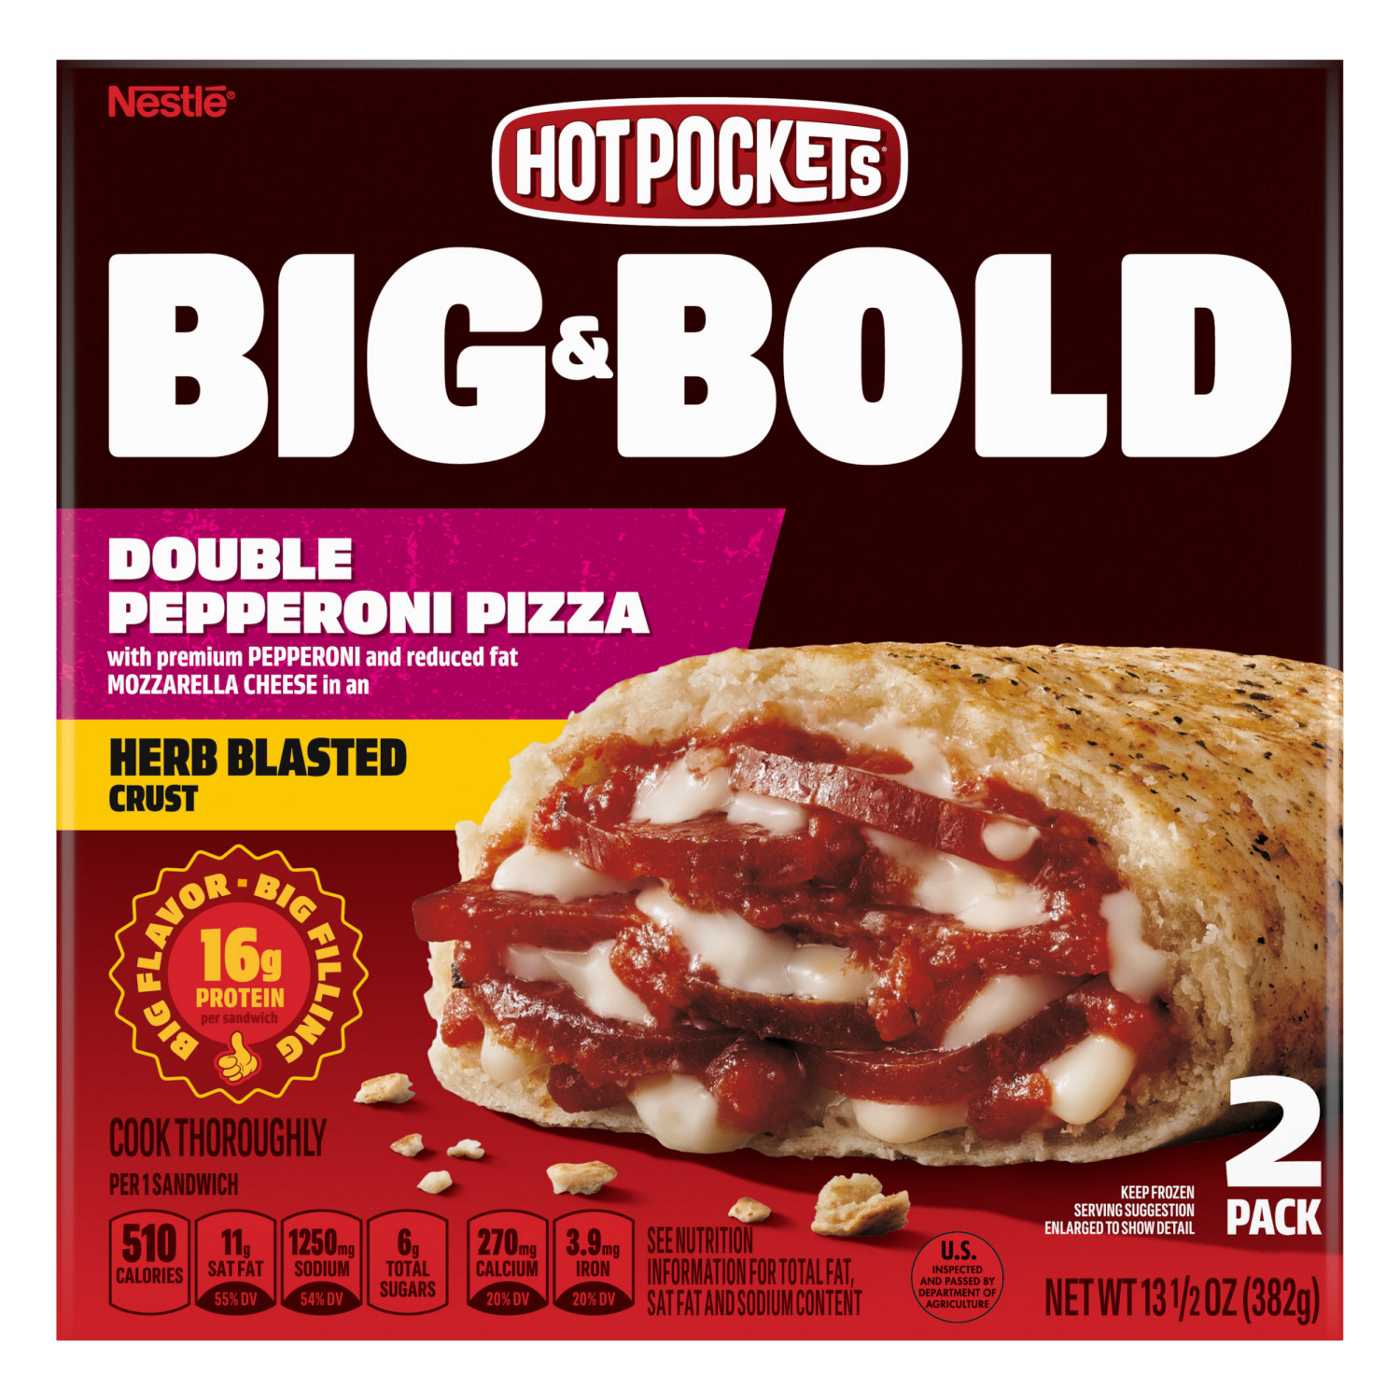 Hot Pockets Big & Bold Double Pepperoni Pizza Sandwiches; image 7 of 8